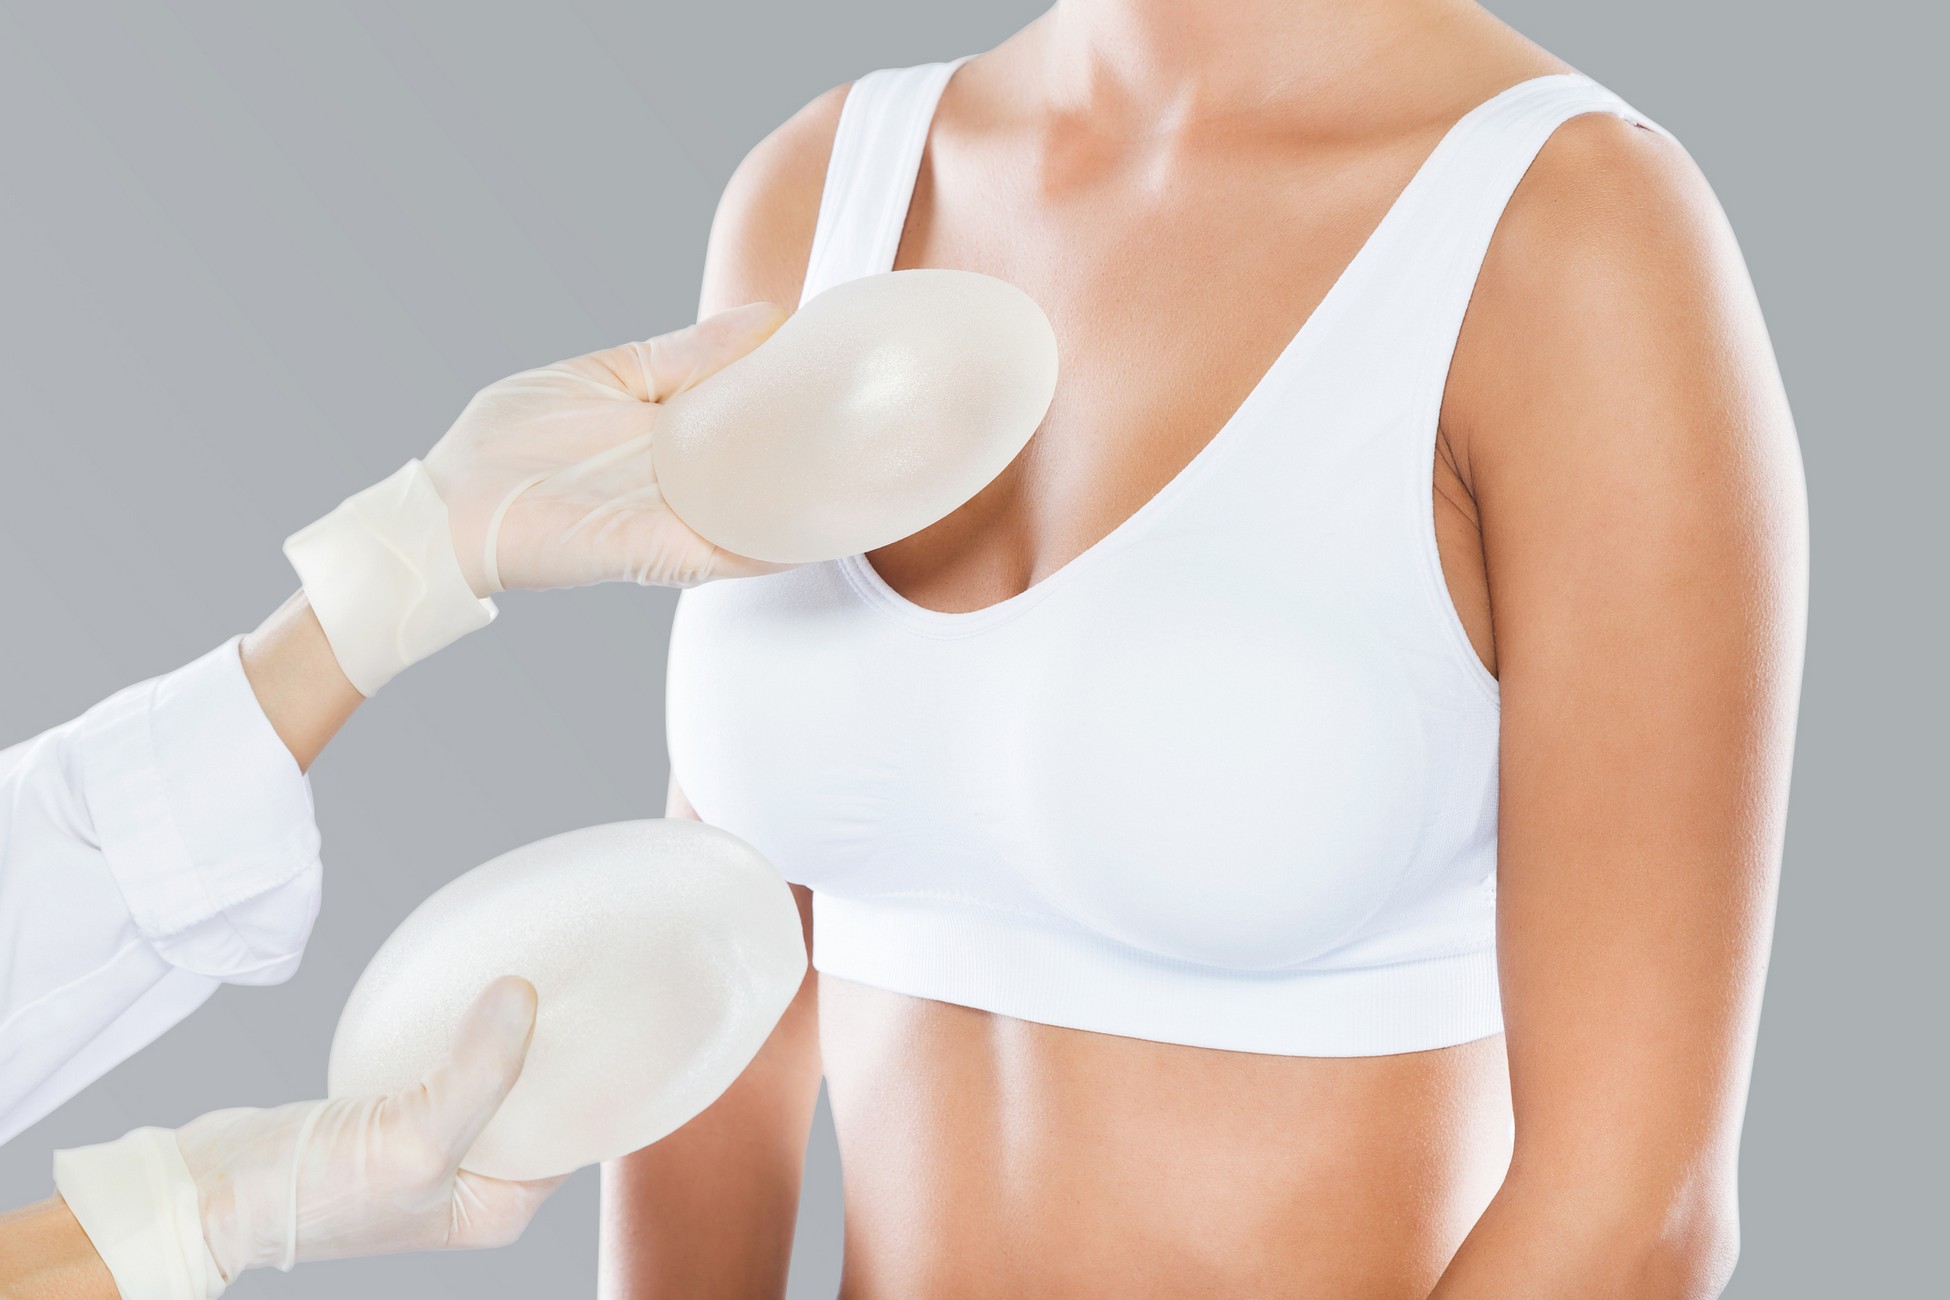 HOW TO CHOOSE THE BEST BREAST IMPLANTS